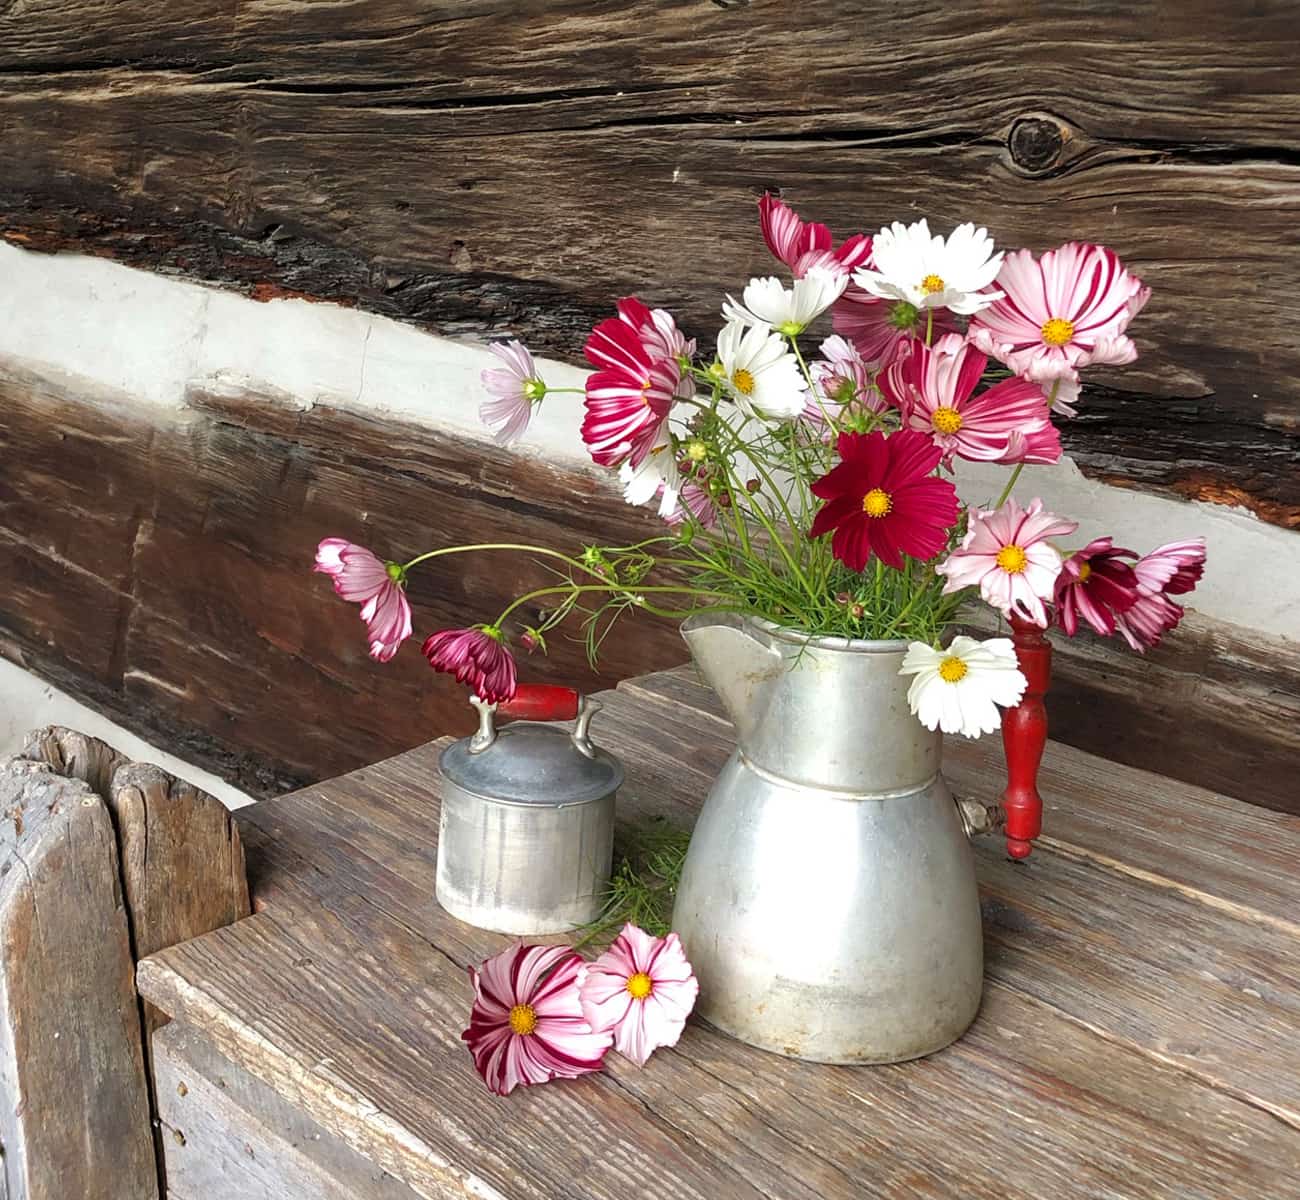 An old aluminum milk pitcher with a red handle holds a fresh-cut bouquet of cosmos standing on a rustic table.